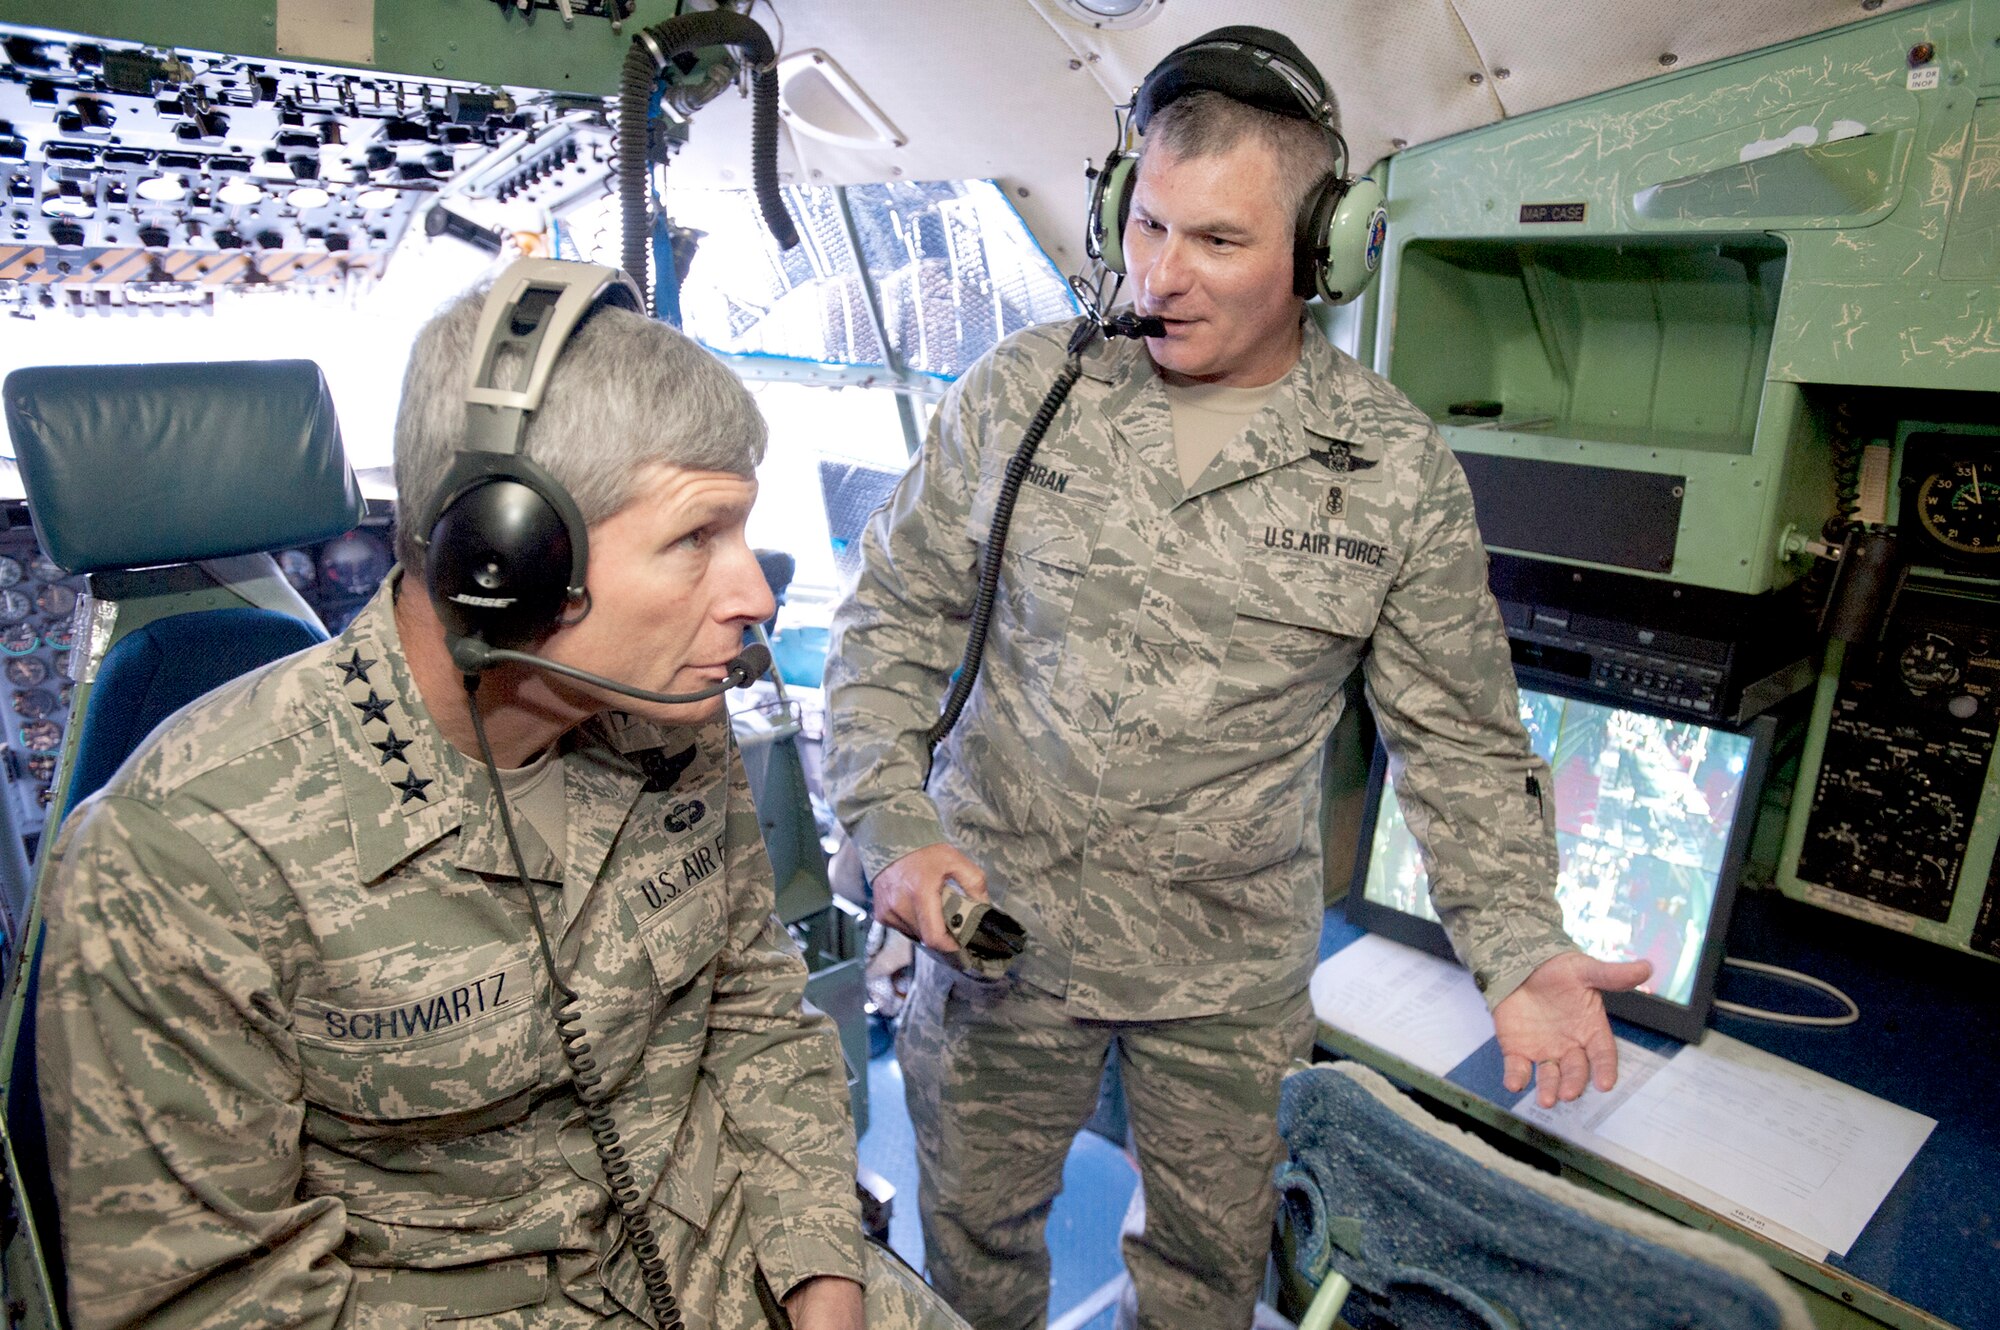 Air Force Chief of Staff Gen. Norton Schwartz listens as Senior Master Sgt. Scott Curran, superintendent of international and expeditionary education and training at the U.S. Air Force School of Aerospace Medicine, explains the mission scenarios and emergency procedures taught in the C-130 Hercules simulators to better prepare aircrews responsible for the medical evacuation of patients. General Schwartz was visiting the school May 13, 2010, at Brooks City-Base in San Antonio.  (U.S. Air Force photo/Steve Thurow)